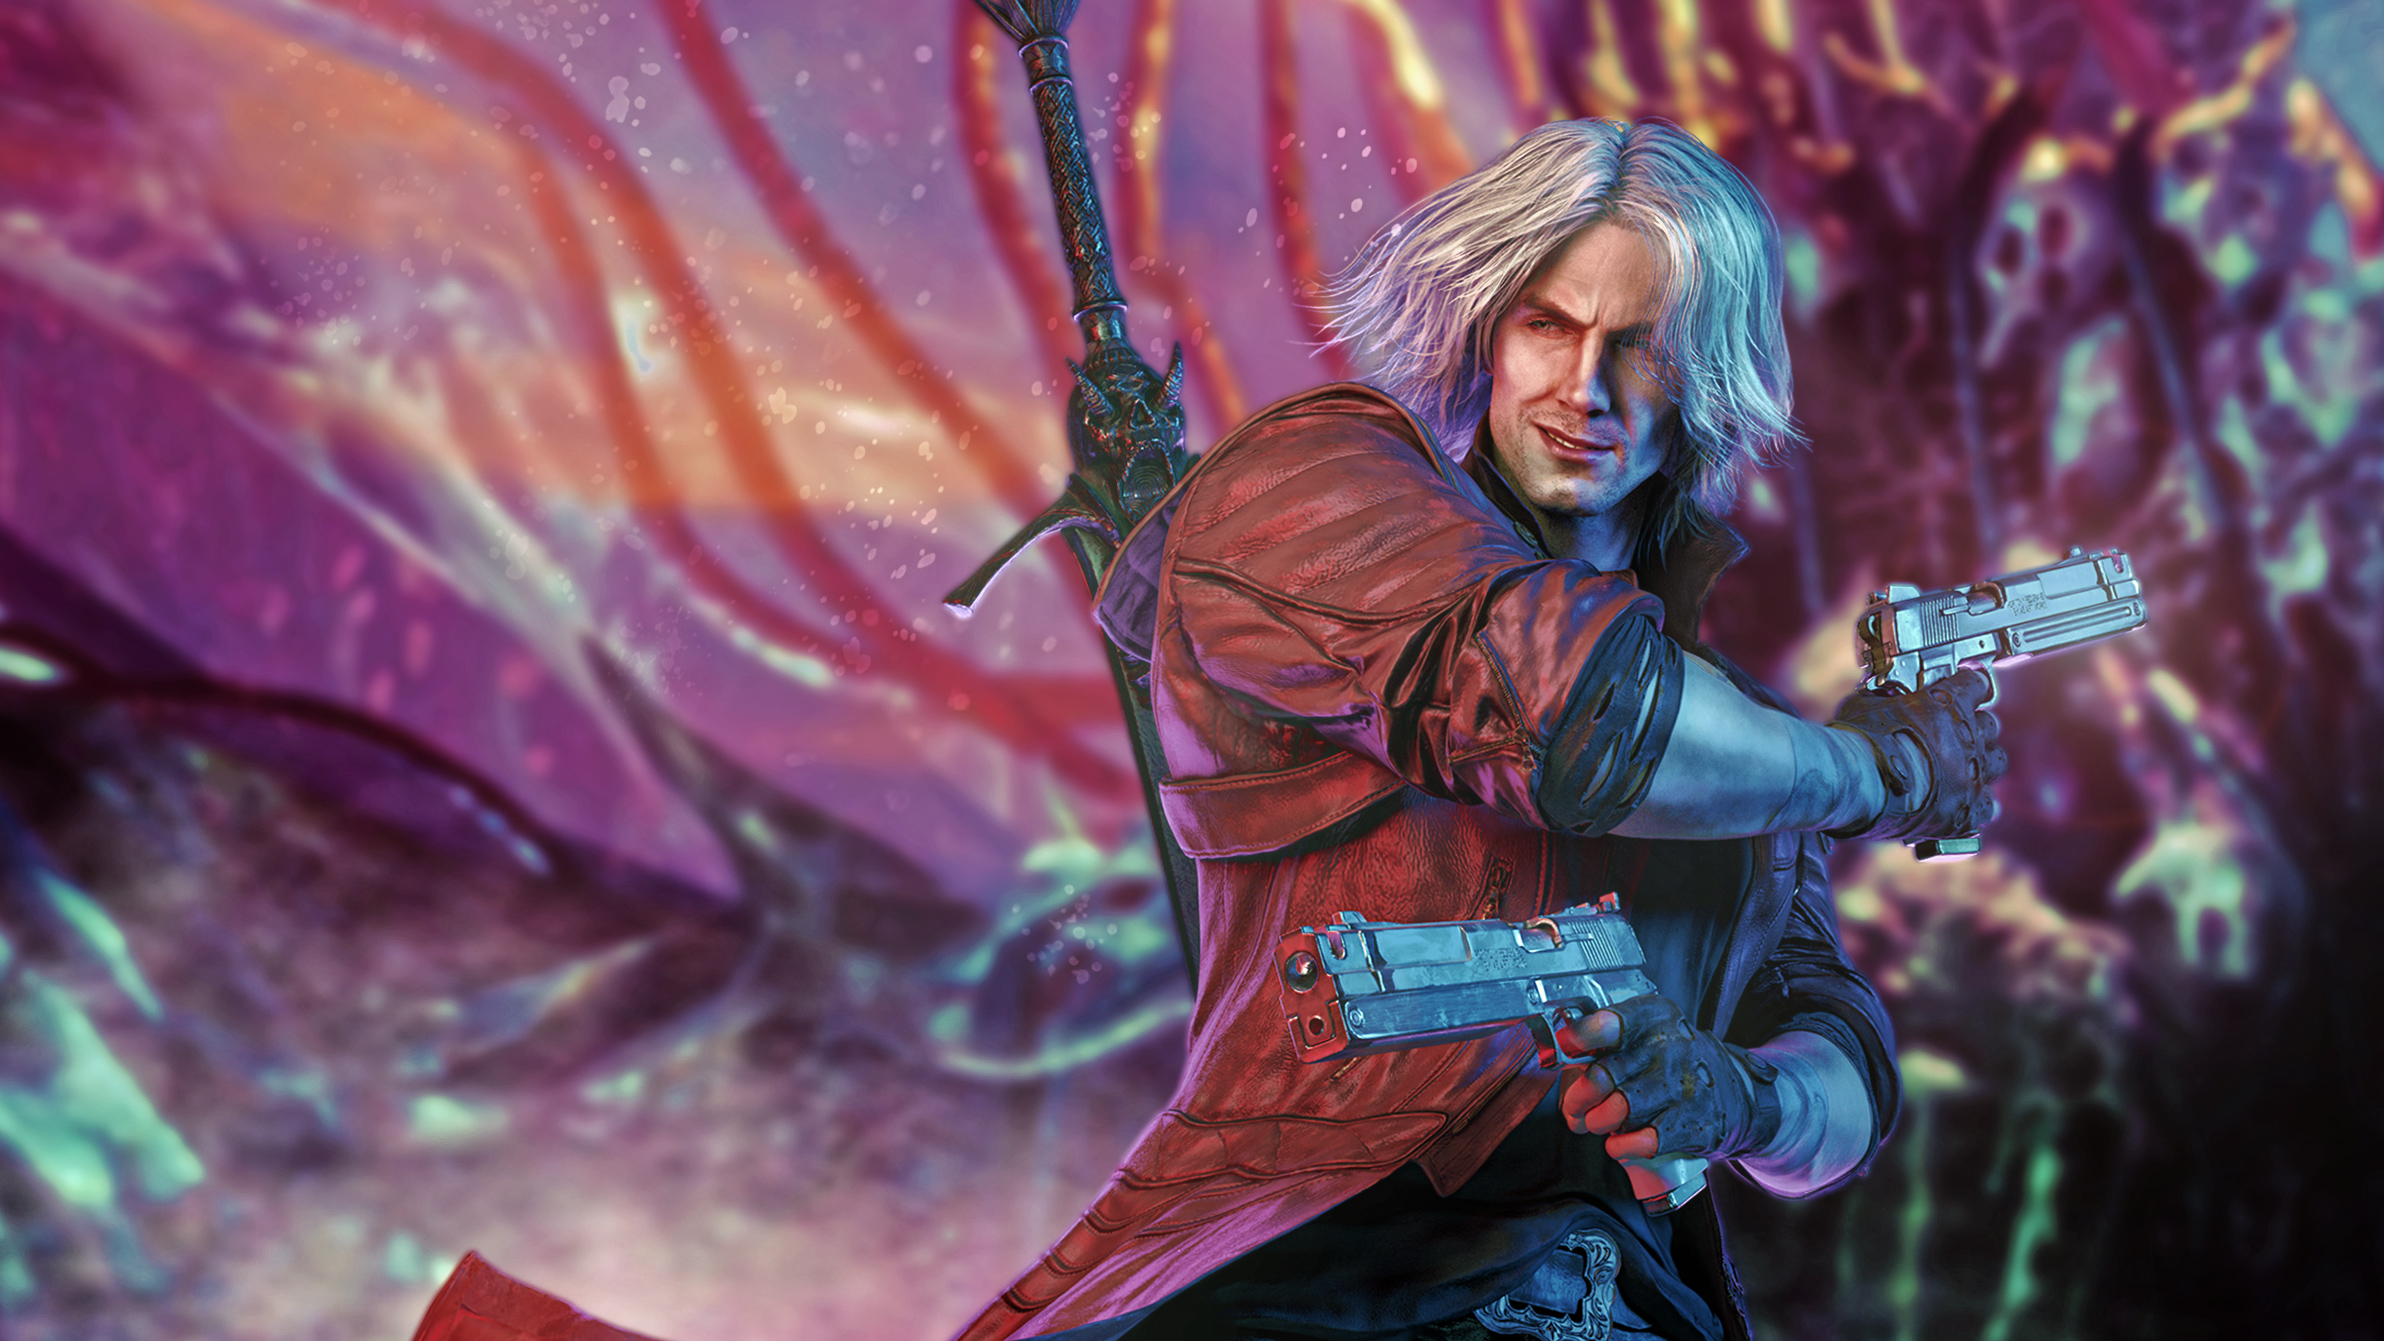 Devil May Cry Wallpapers on WallpaperDog